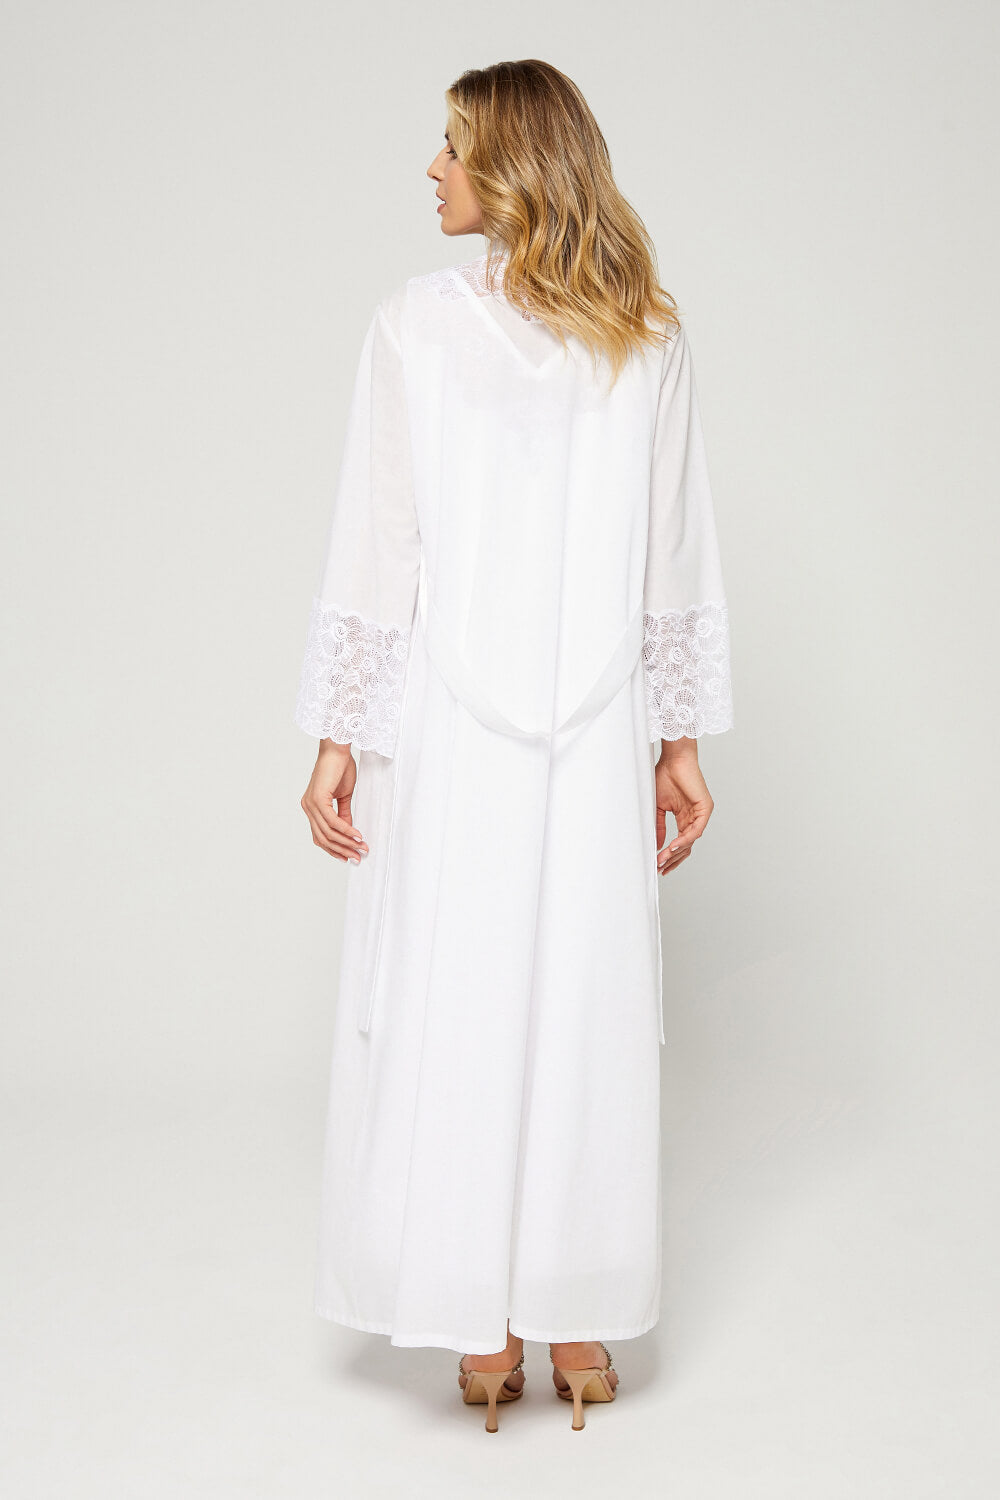 Patty - Long and Buttoned Cotton Voile Robe Set - Off White